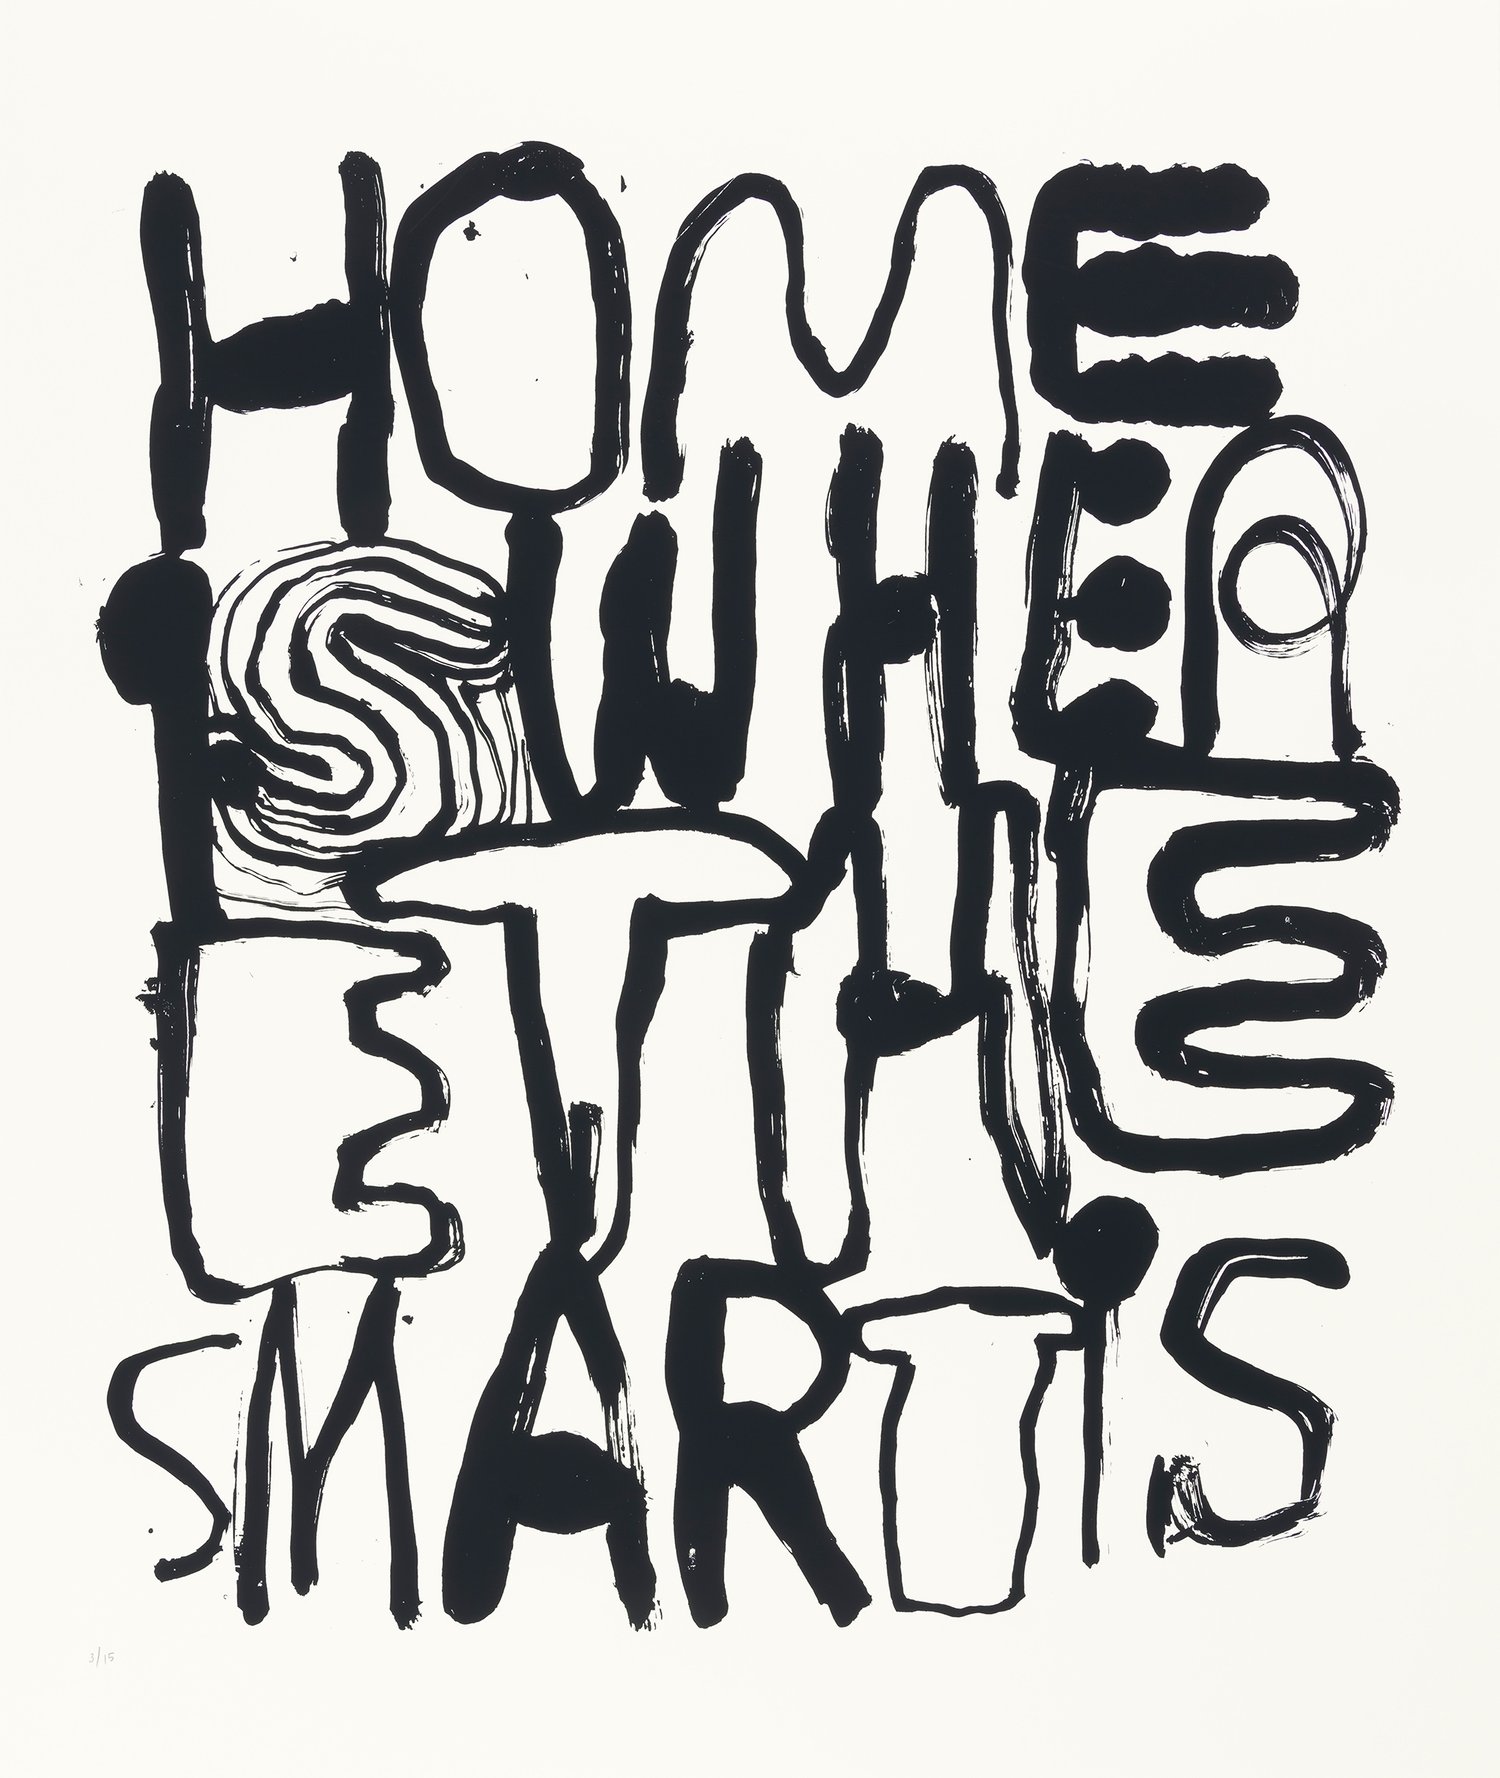 Home is where the smart is